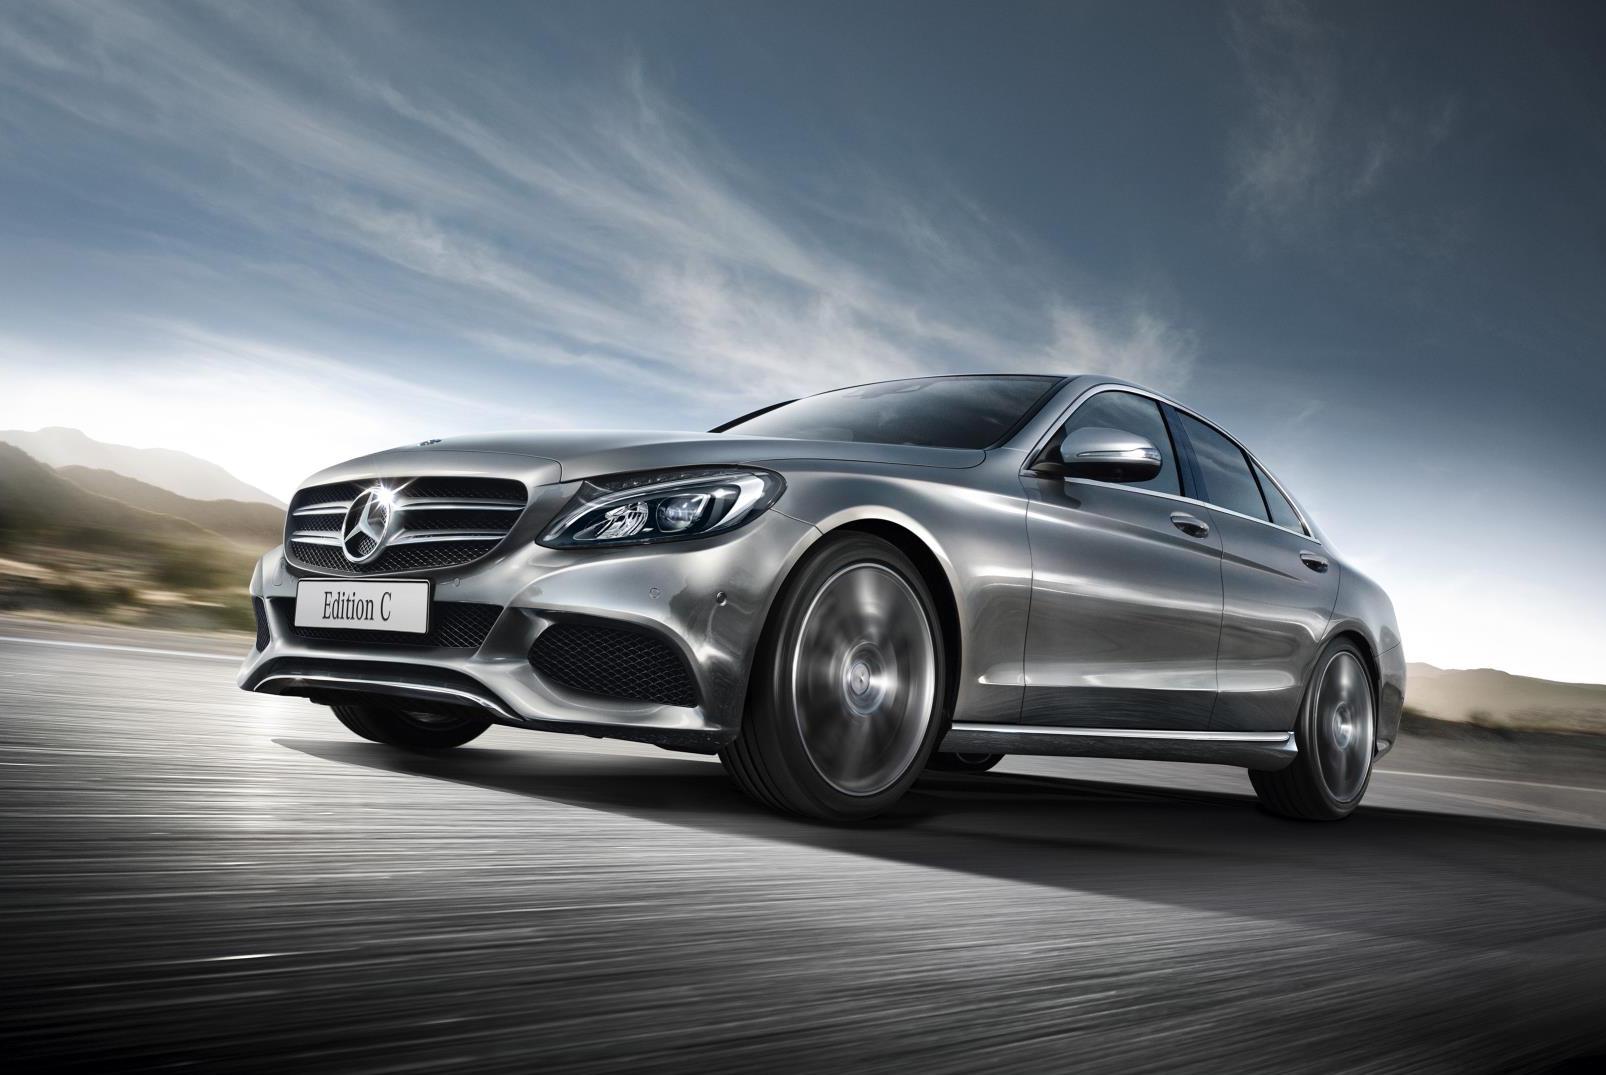 Mercedes-Benz C 200 Edition C on sale in Australia from $60,900